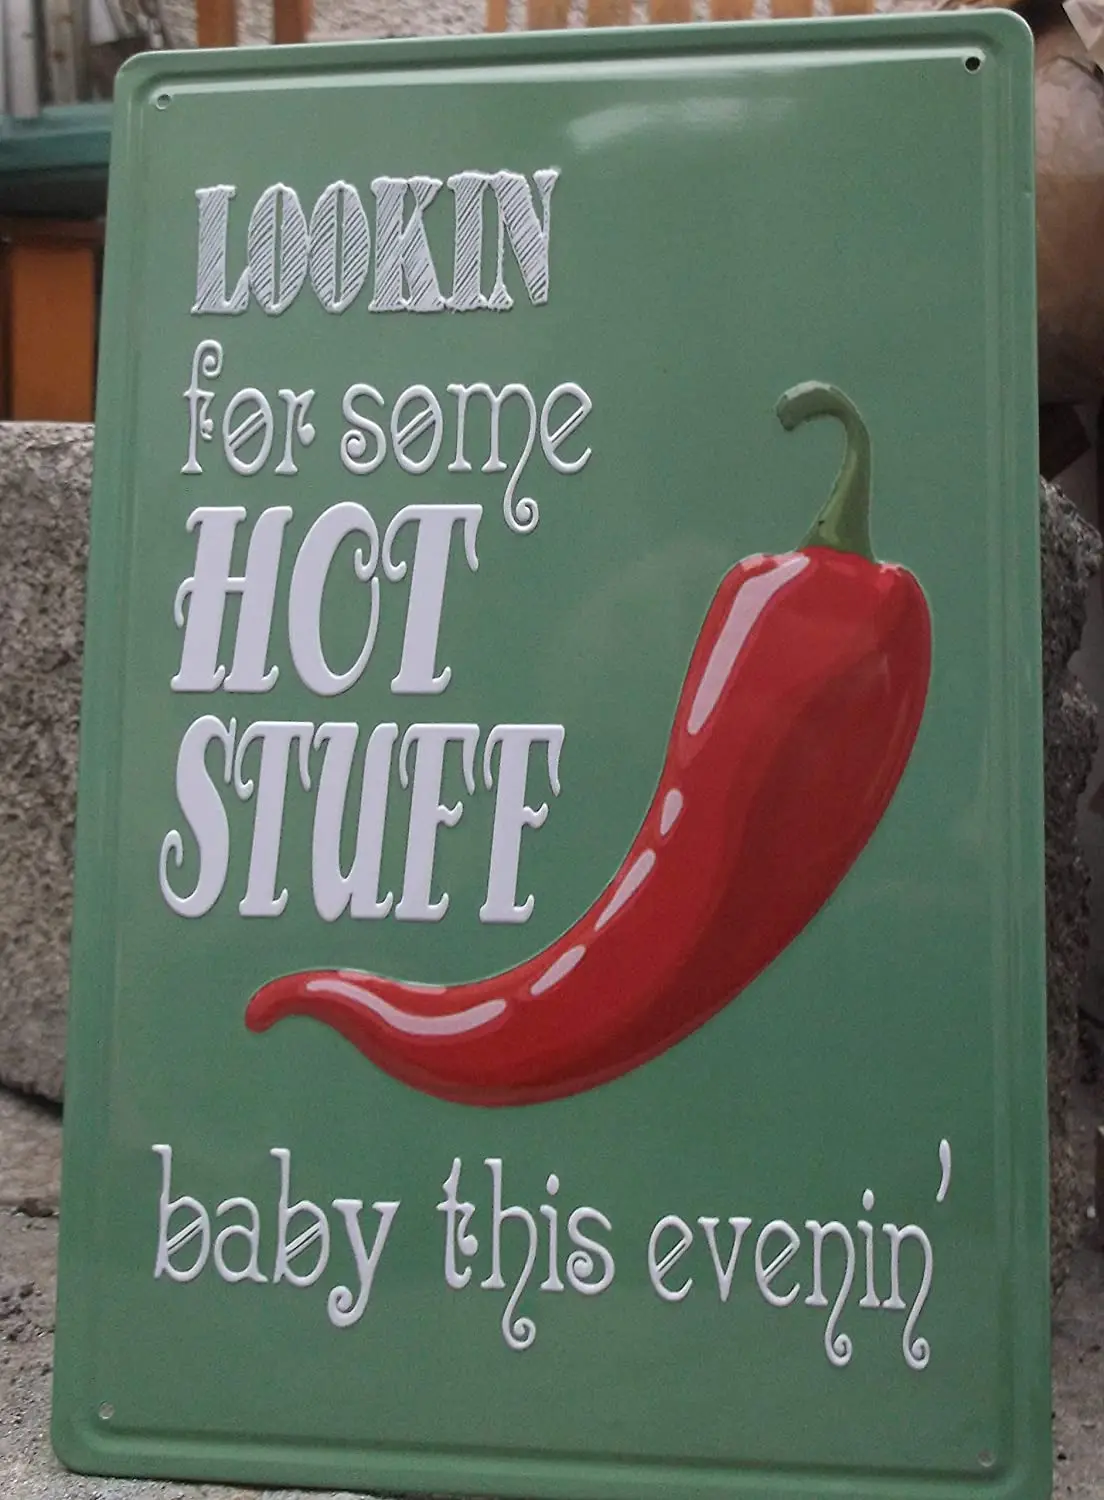 

Hot Stuff Embossed Retro Metal Tin Sign Plaque Poster Wall Decor Art Shabby Chic Gift